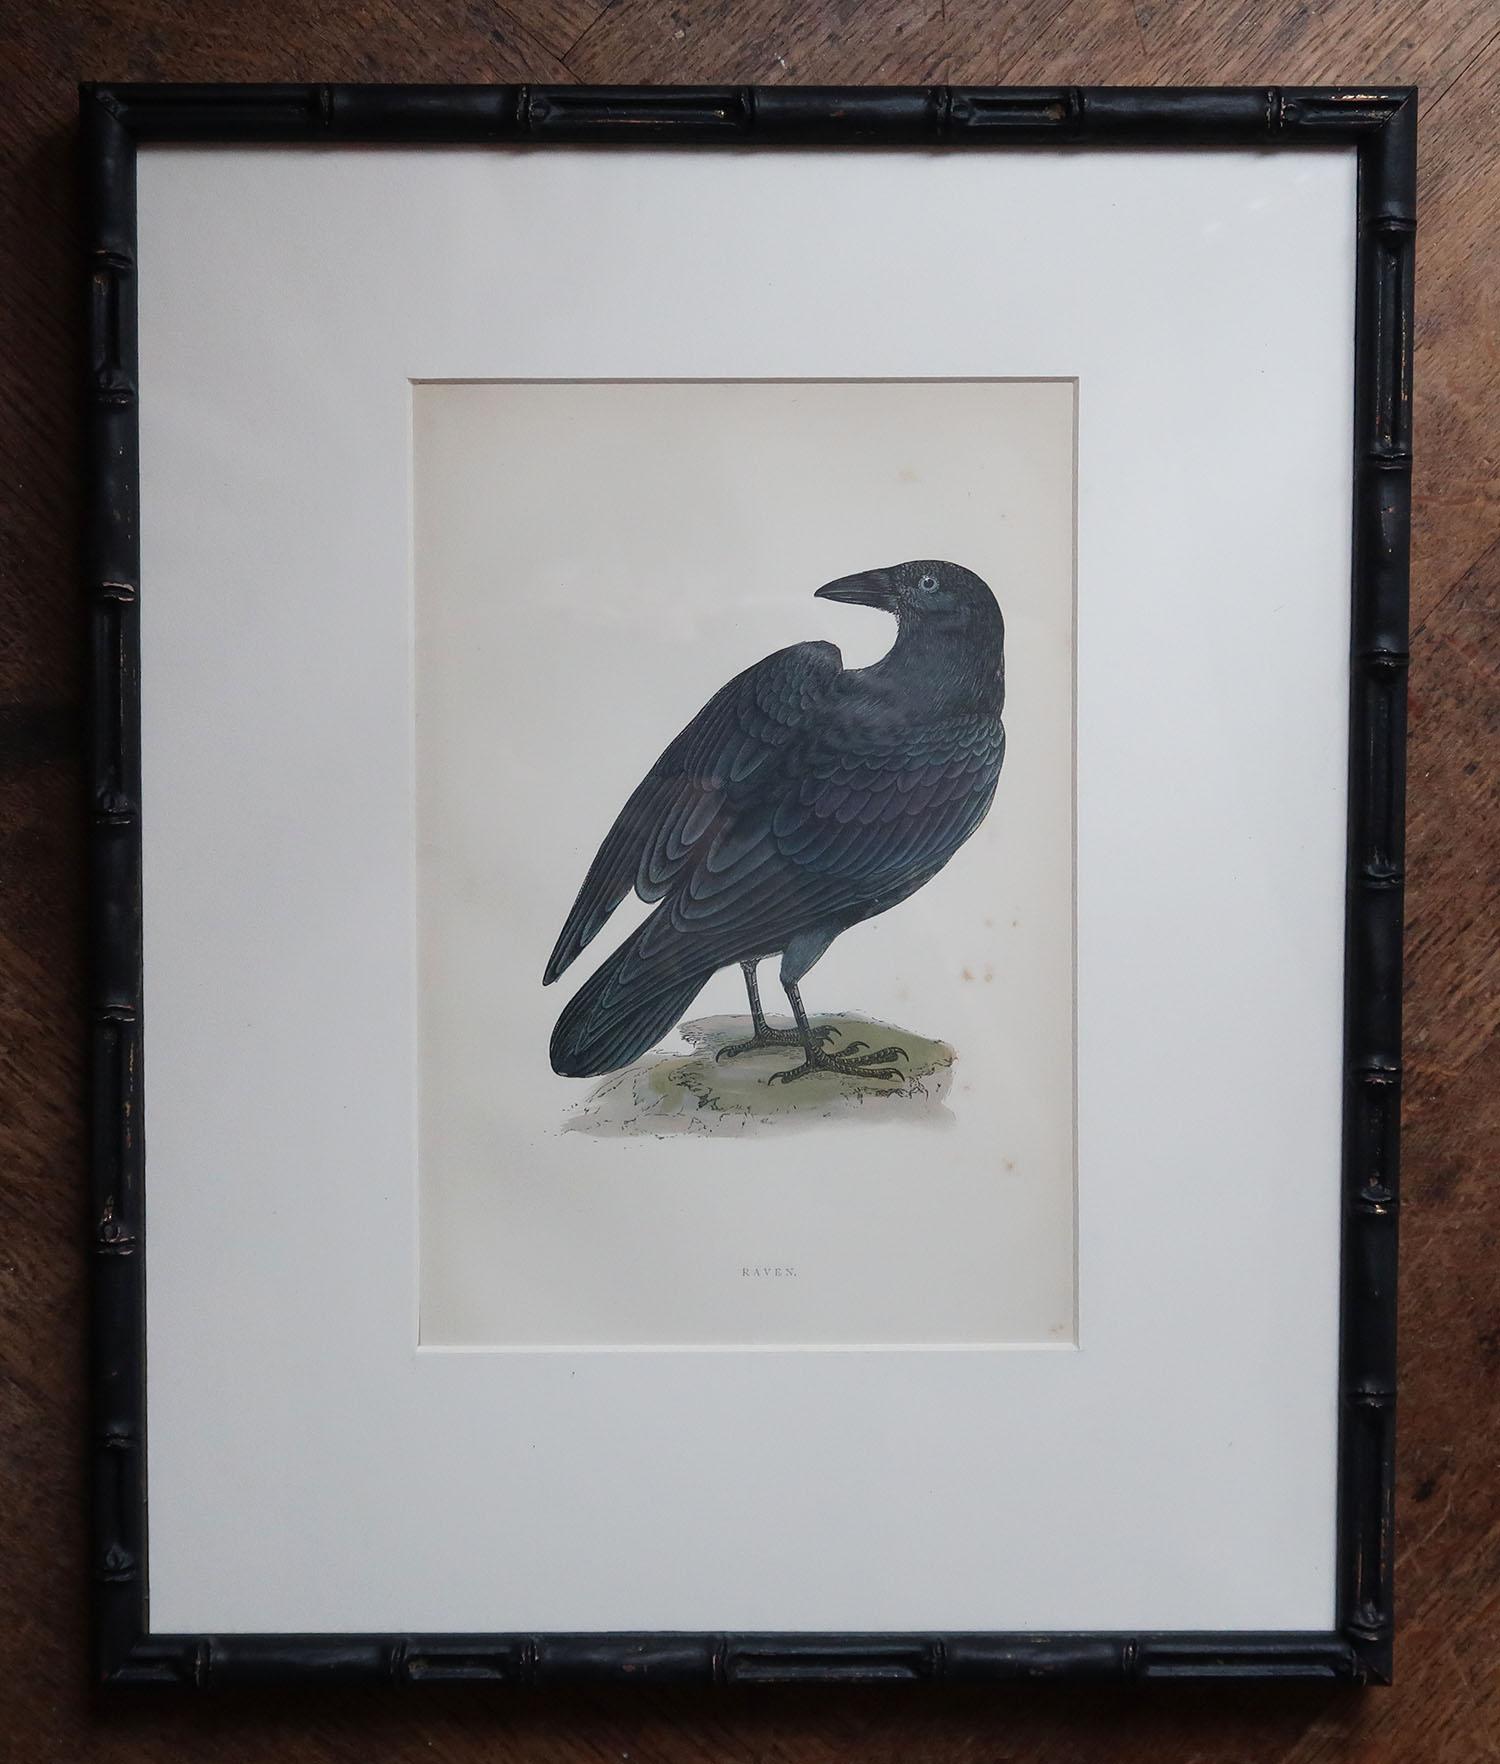 Wonderful set of 6 antique bird prints. Raven, crows etc

Lithographs after the original drawings by Alexander Francis Lydon

Original colour

Published by John C. Nimmo, Circa 1880

Presented in our own custom made ebonised faux bamboo